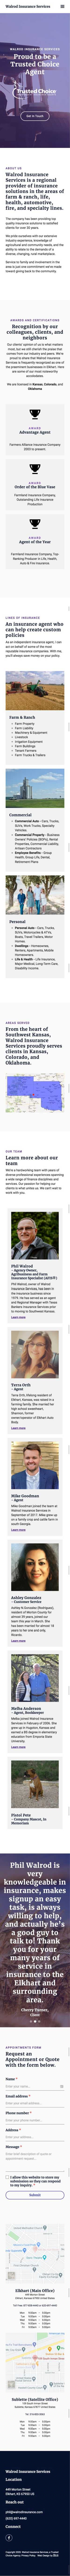 Walrod Insurance Services